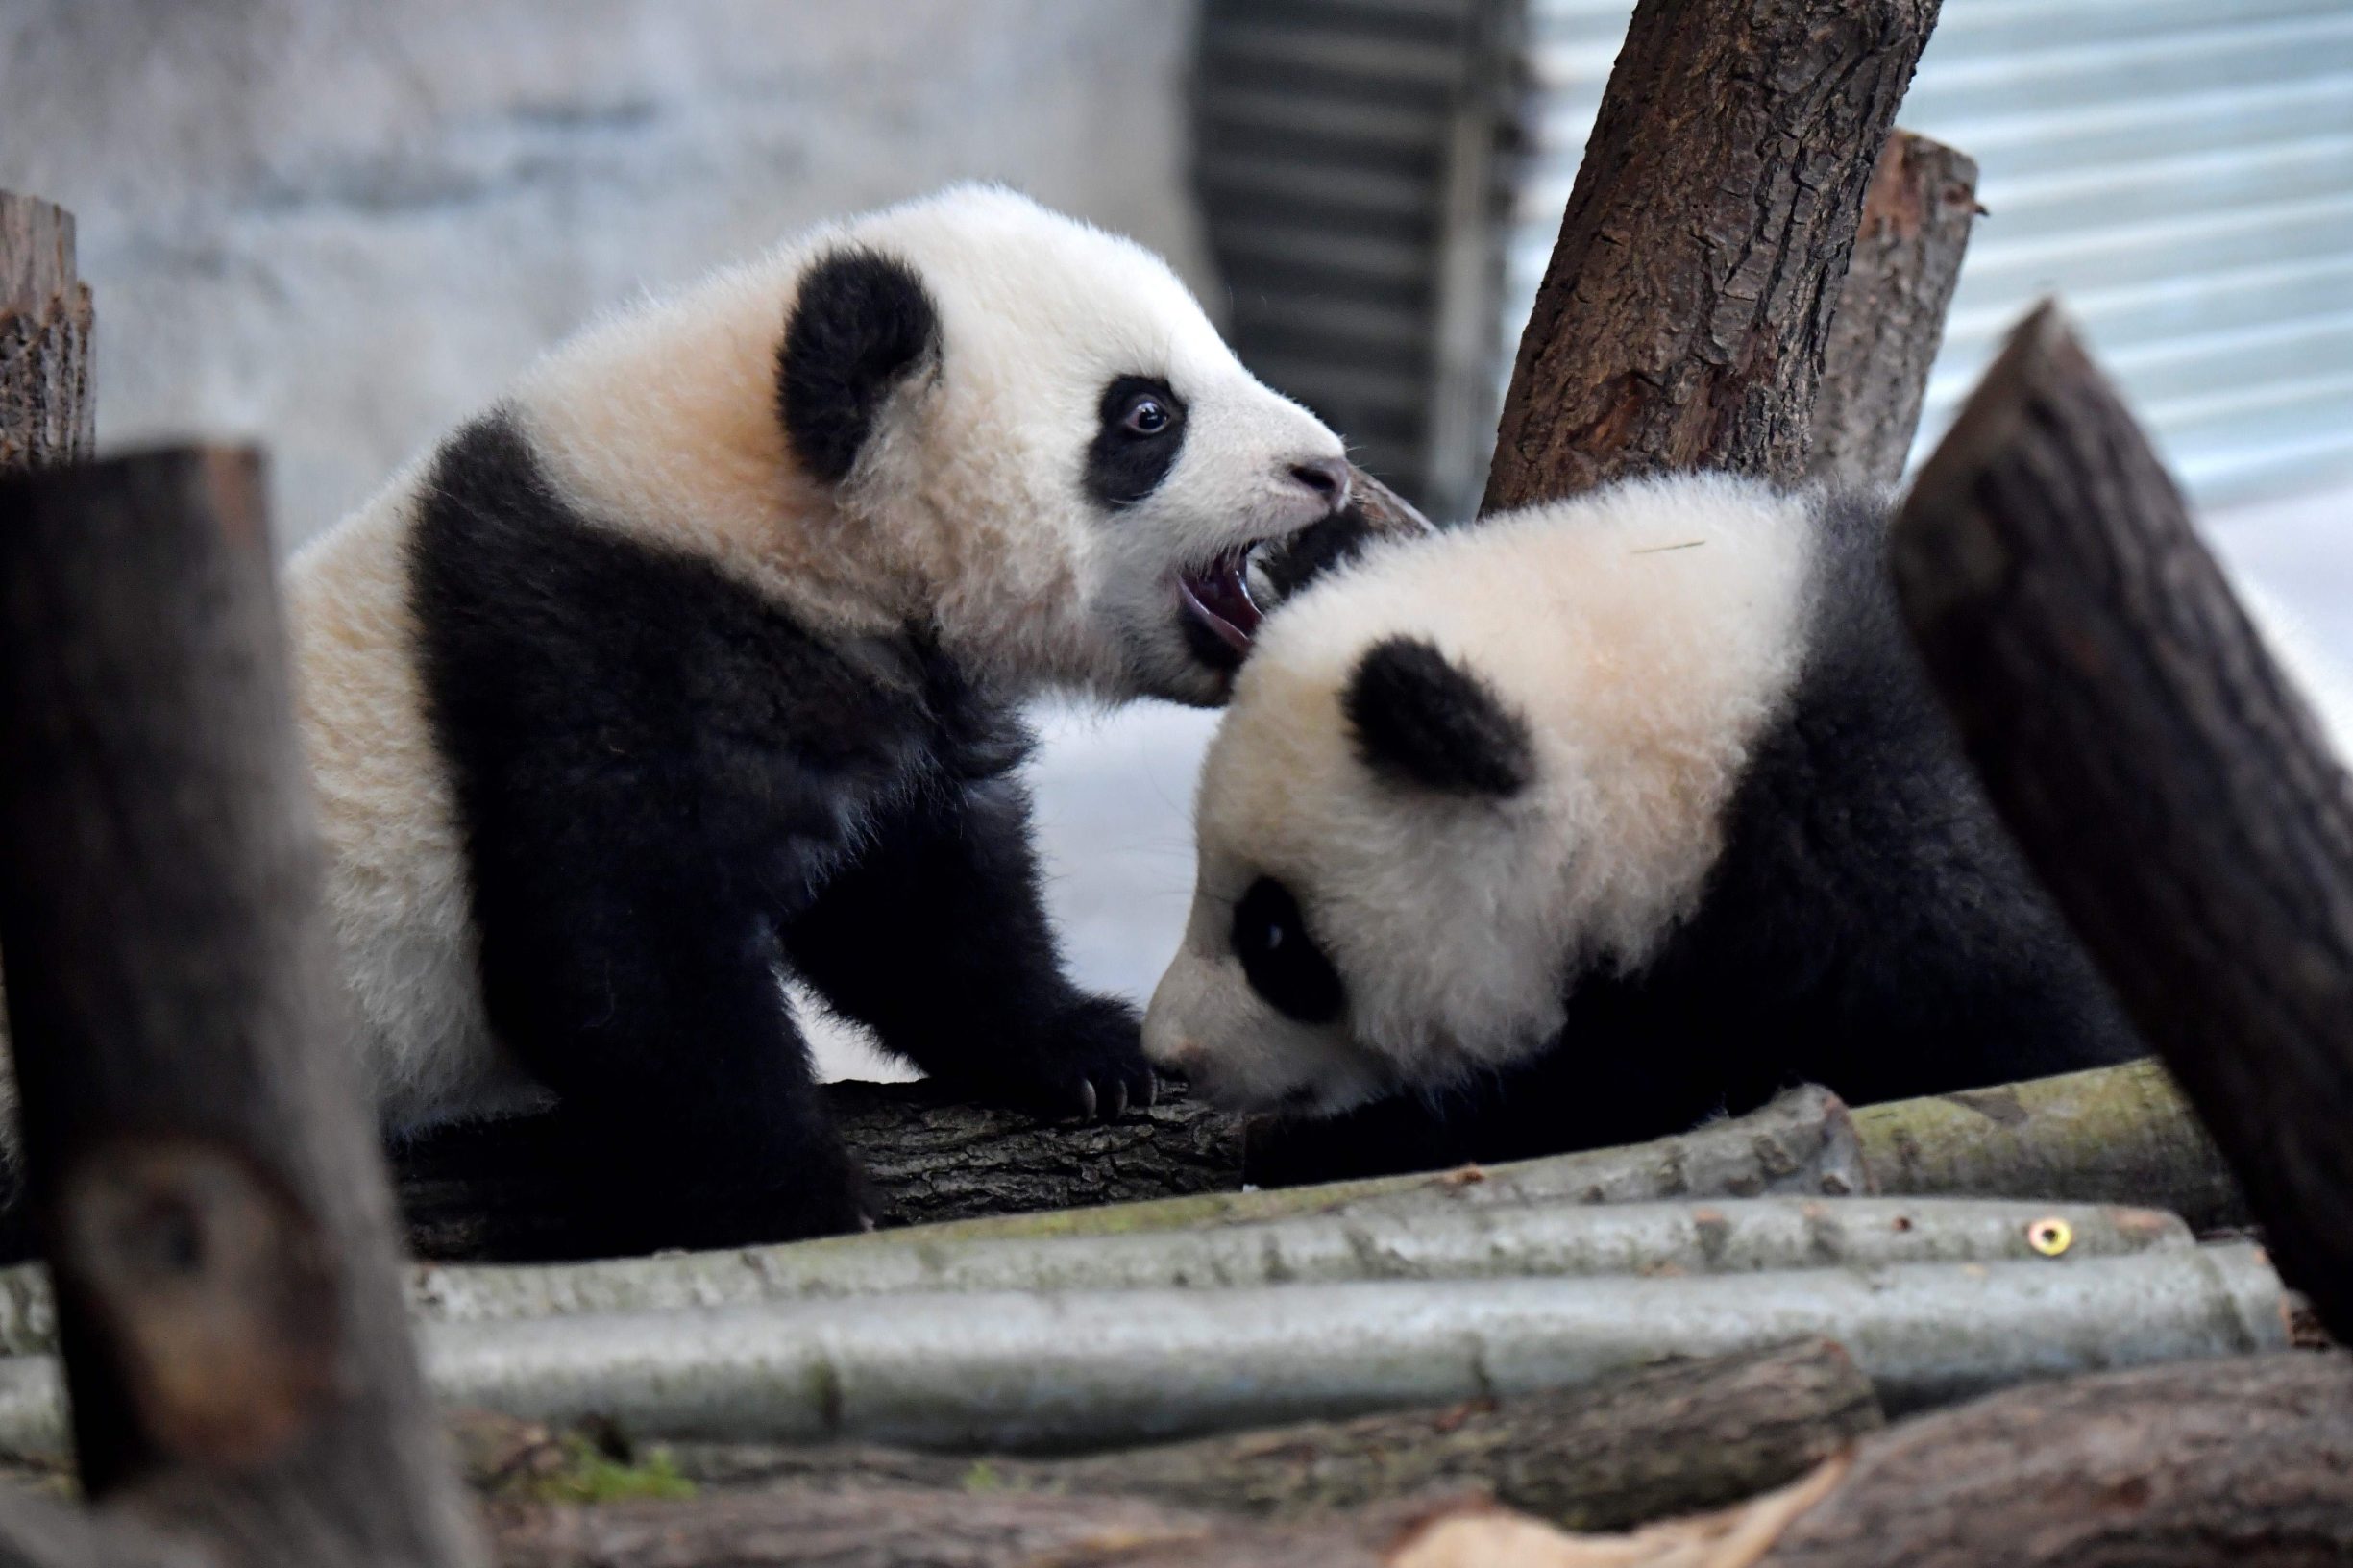 A picture taken on January 29, 2020 shows Meng Yuan and Meng Xiang, two Berlin-born Chinese panda cubs, at their enclosure during their first presentation to the public at the Zoologischer Garten zoo in Berlin. - Meng Meng gave birth to twins on August 31, 2019. On loan from China, Meng Meng and male panda Jiao Qing arrived in Berlin in June 2017. While the cubs, Meng Yuan and Meng Xiang, are born in Berlin, they remain Chinese and must be returned to China within four years after they have been weaned. (Photo by Tobias SCHWARZ / AFP)